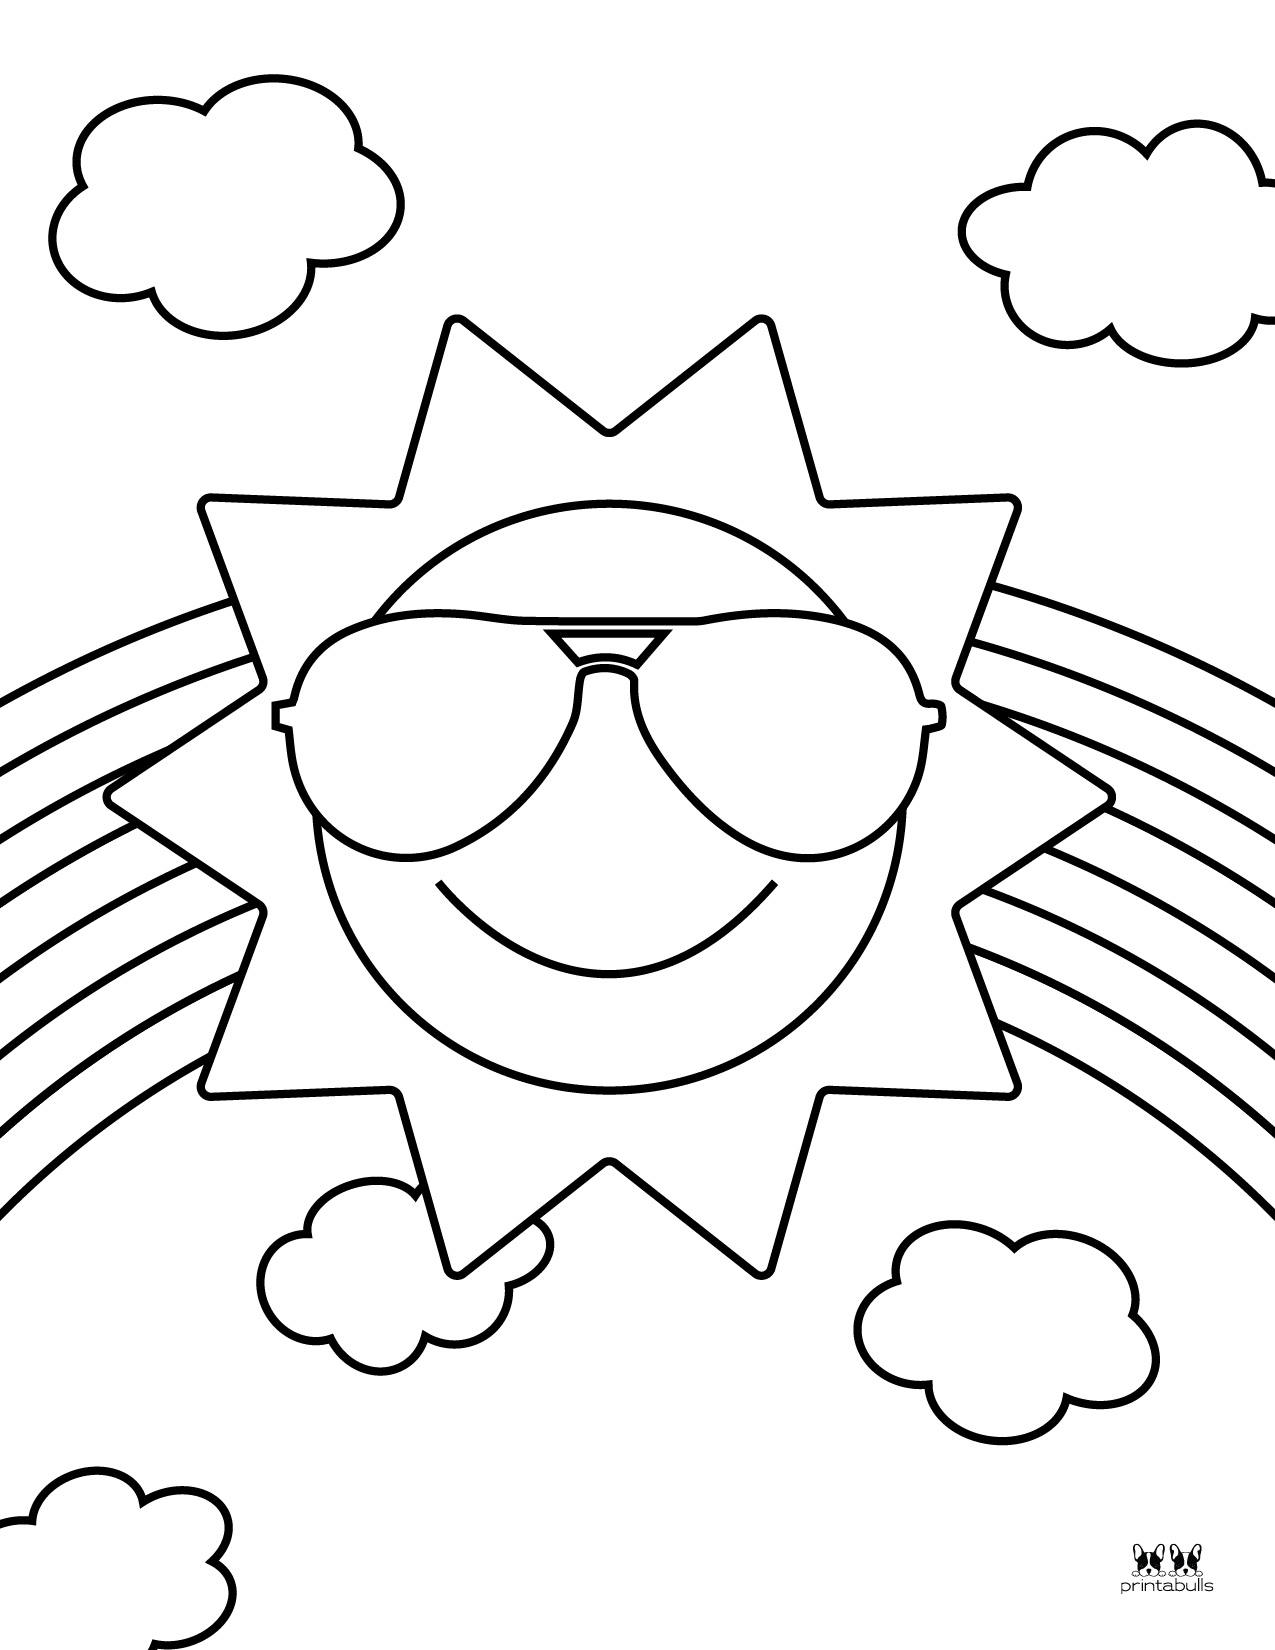 Rainbow Coloring Pages 50 Free Printable Pages Printa - vrogue.co